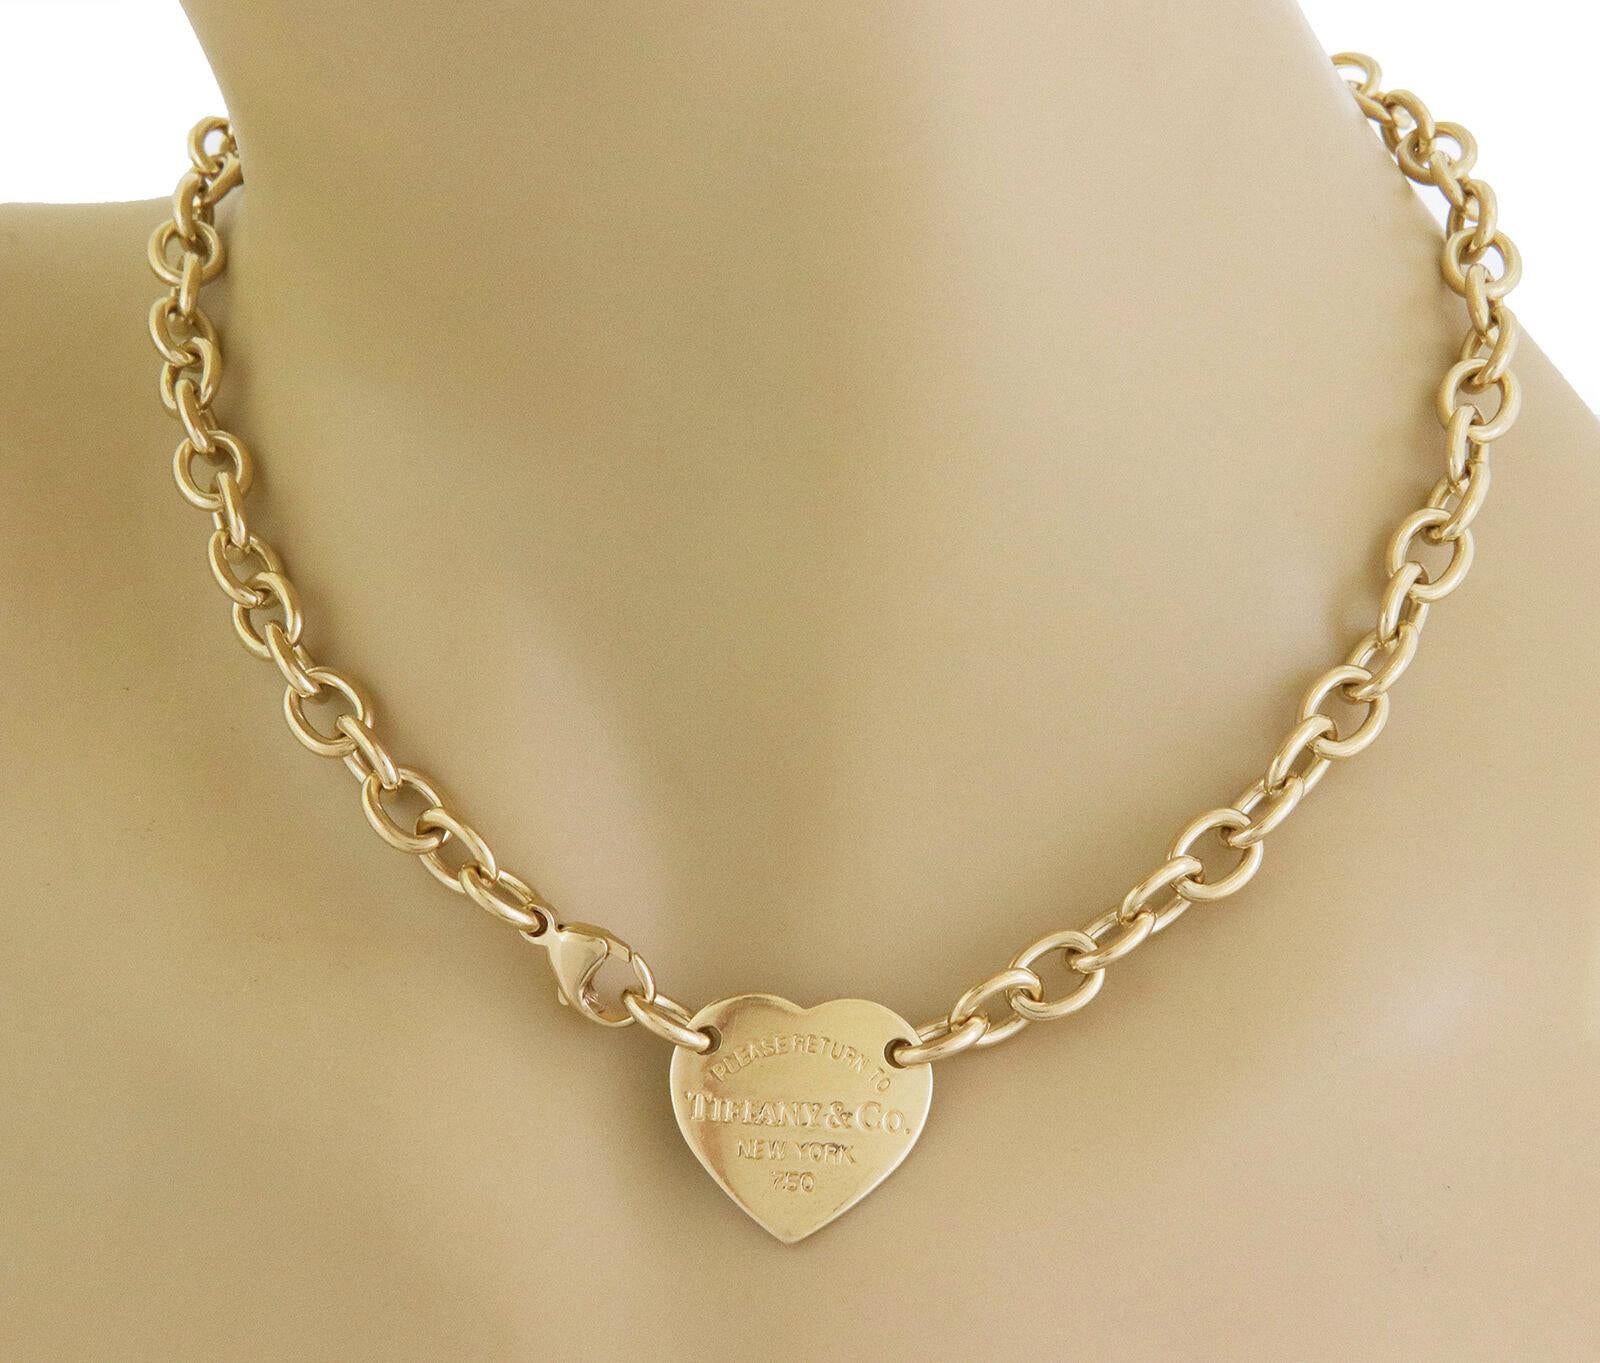 This is a popular authentic necklace from Tiffany & Co. Crafted from 18k yellow gold with a heart shape pendant tag stamped 